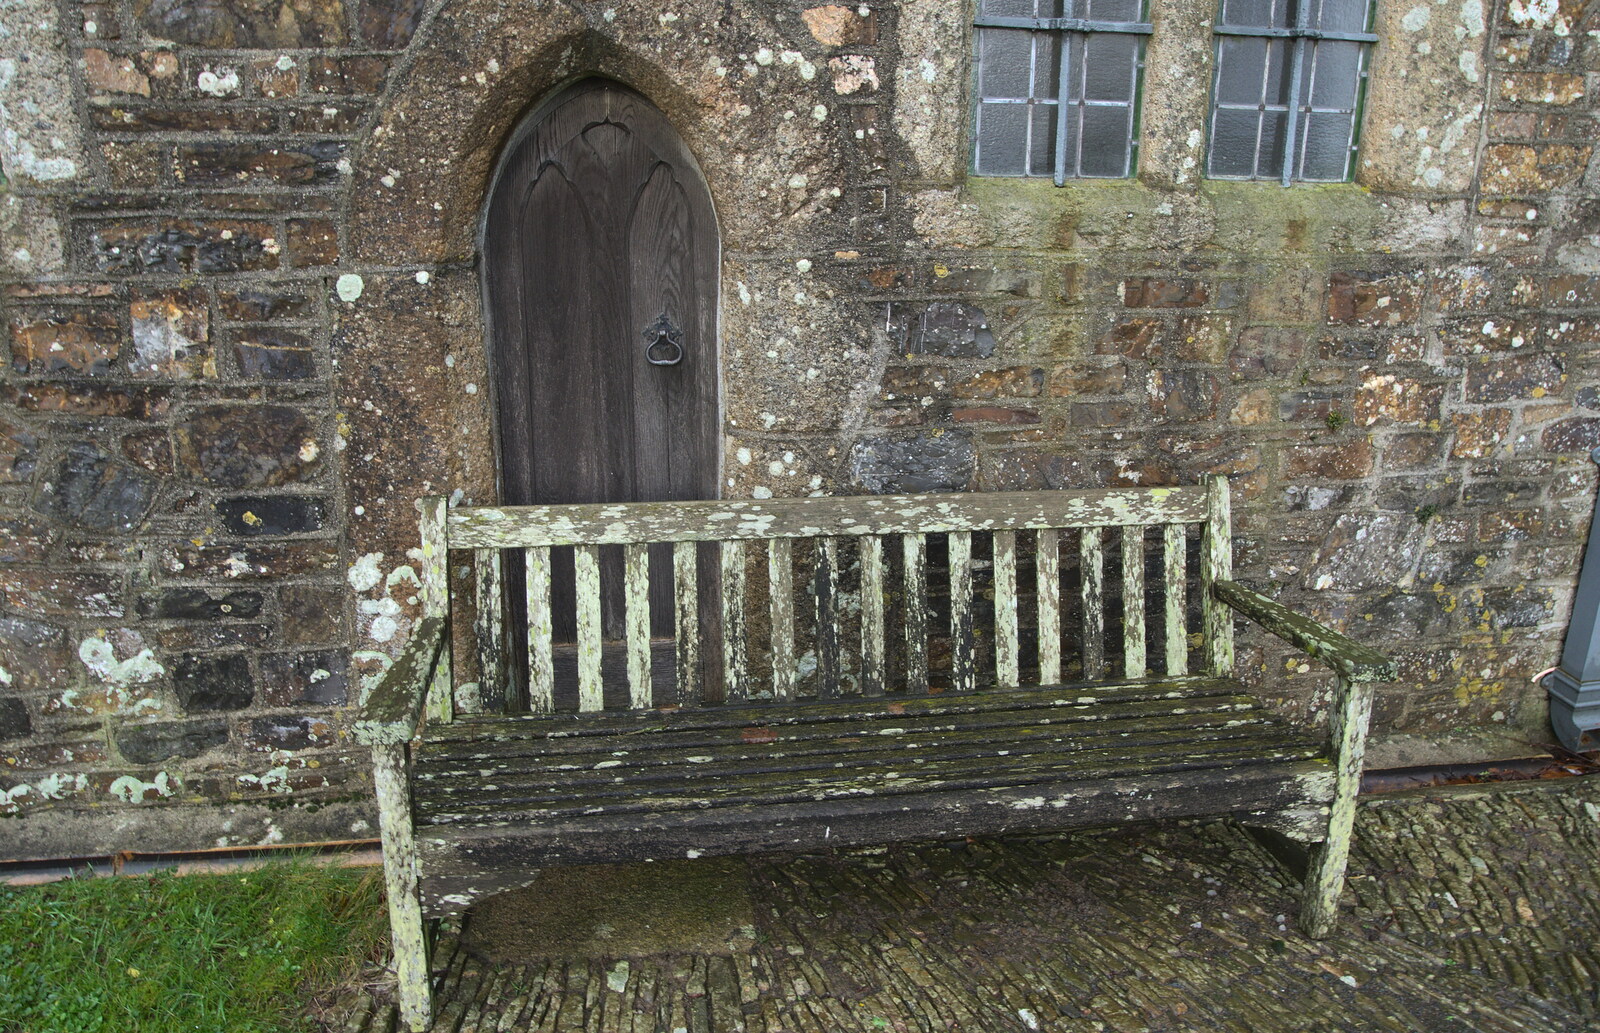 Well-weathered bench at St. Michael's Church from A Trip to Spreyton, Devon - 24th December 2012